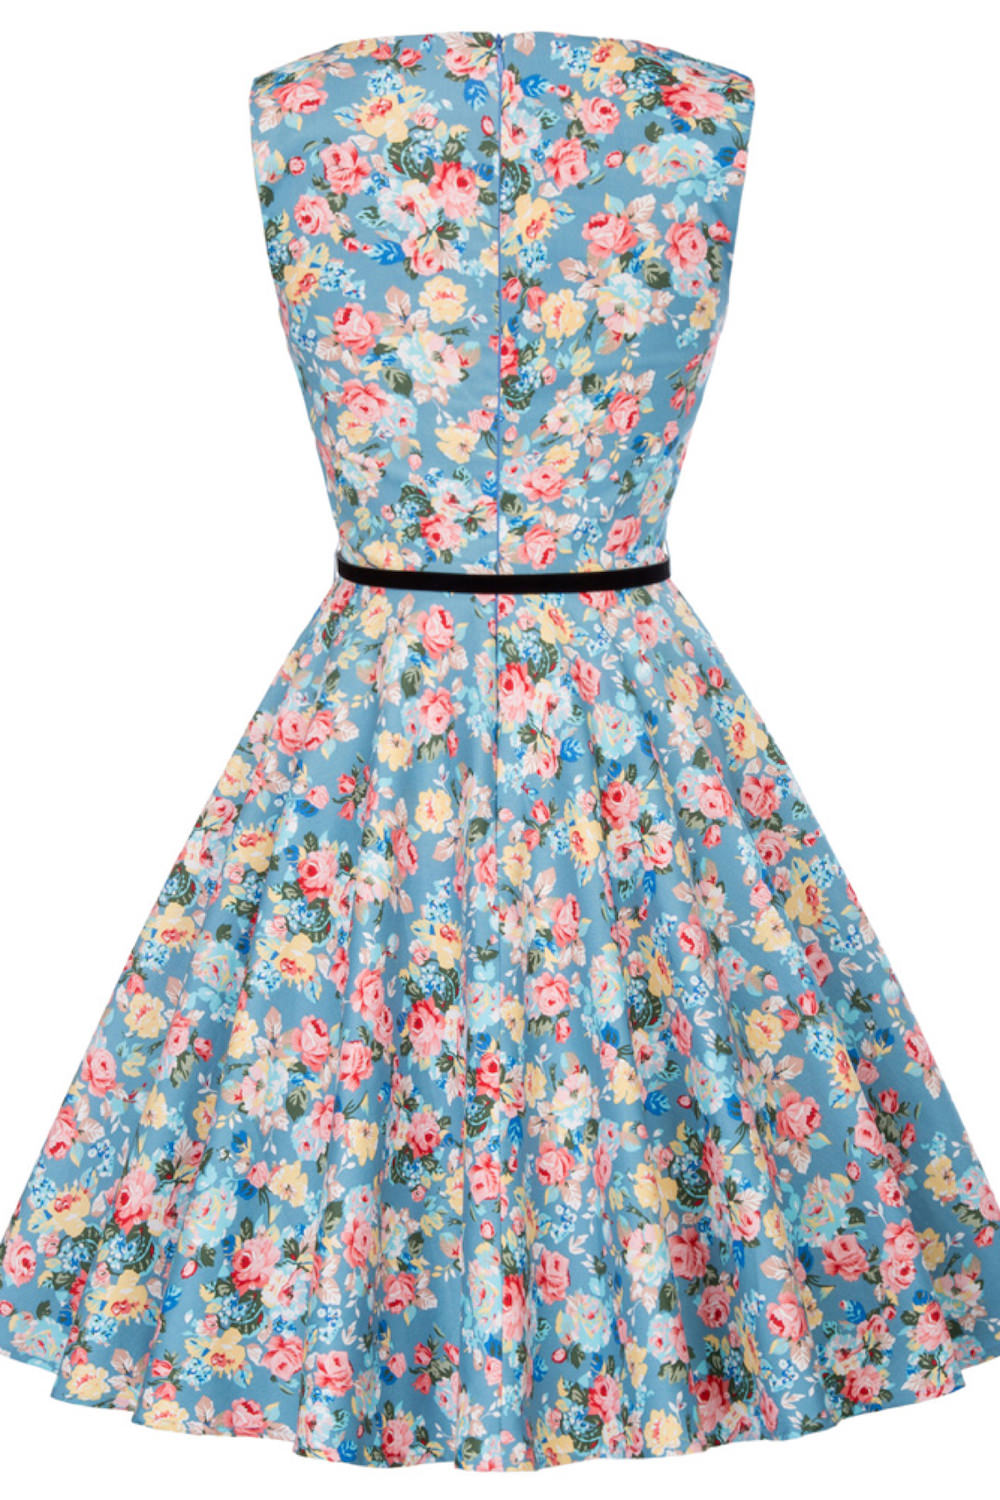 "Ruby" Pastel Floral Fit & Flare Dress